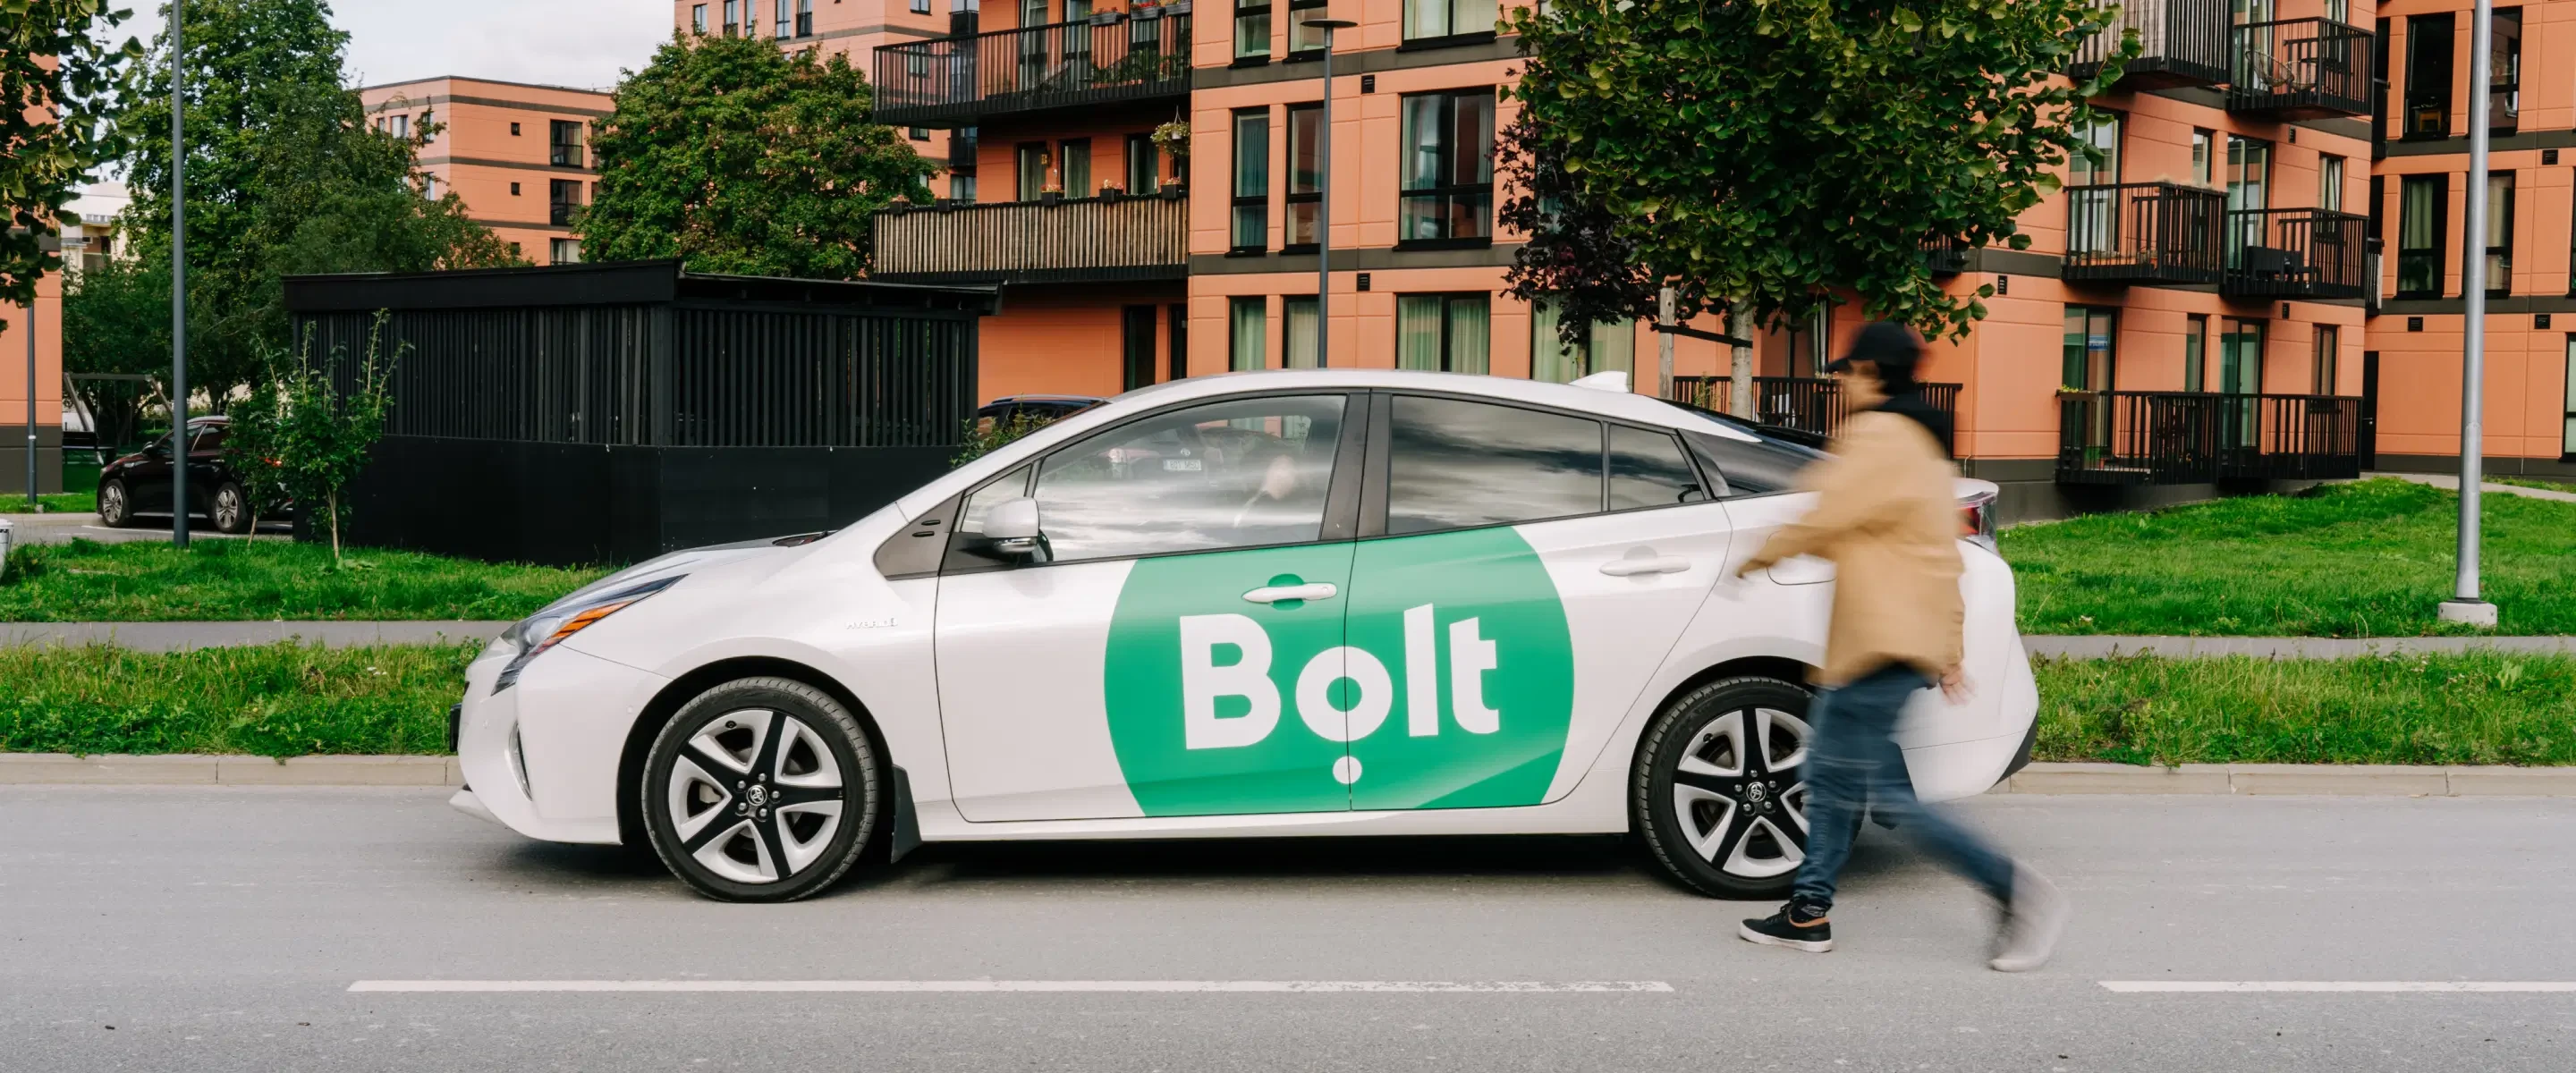 Get the best of Bolt with Bolt Plus